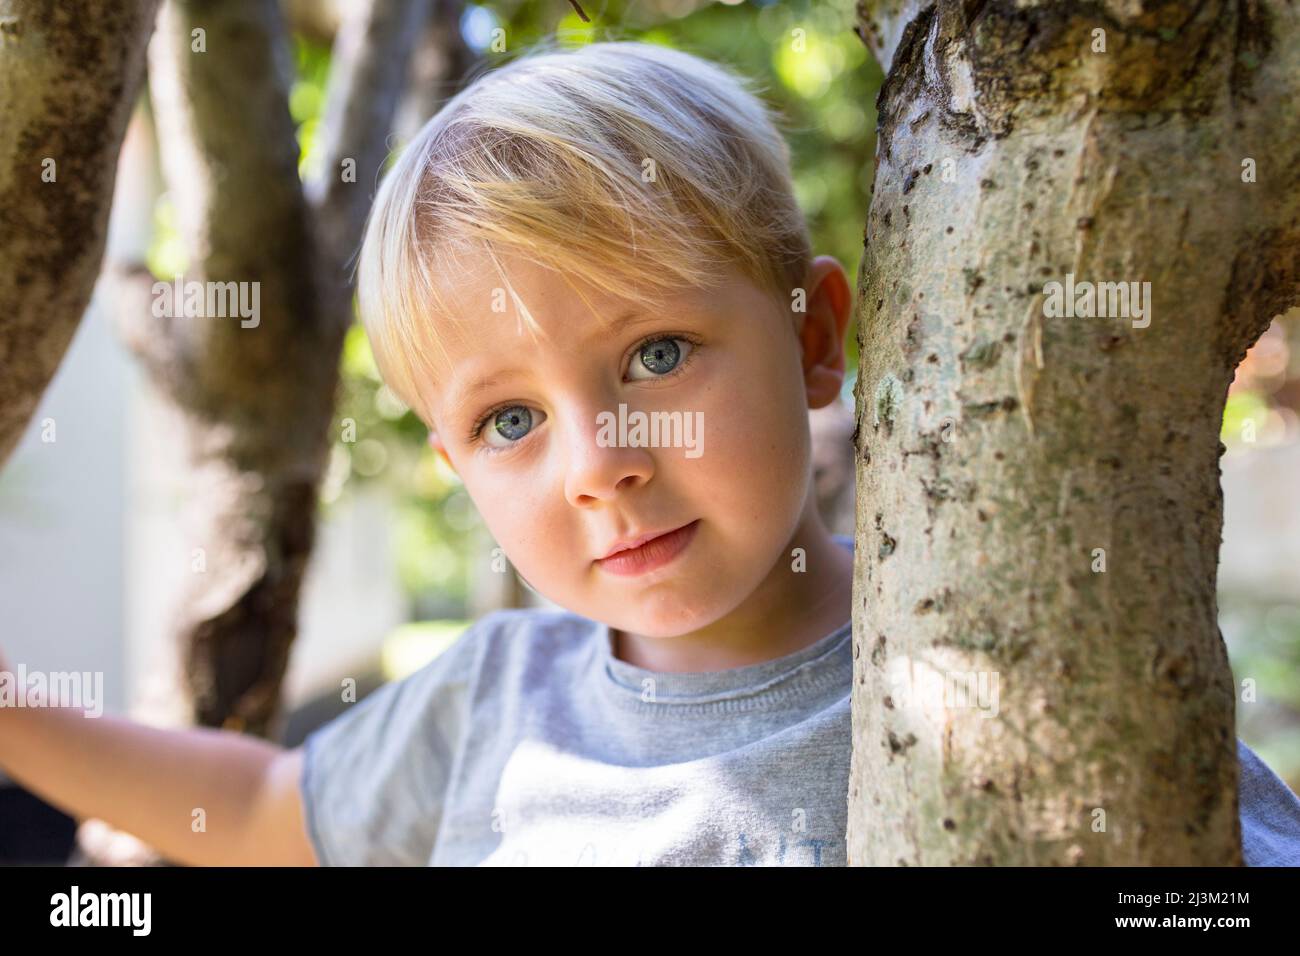 Close-up of a young boy with blue eyes in a tree, looking at the camera; Vientiane, Vientiane Prefecture, Laos Stock Photo